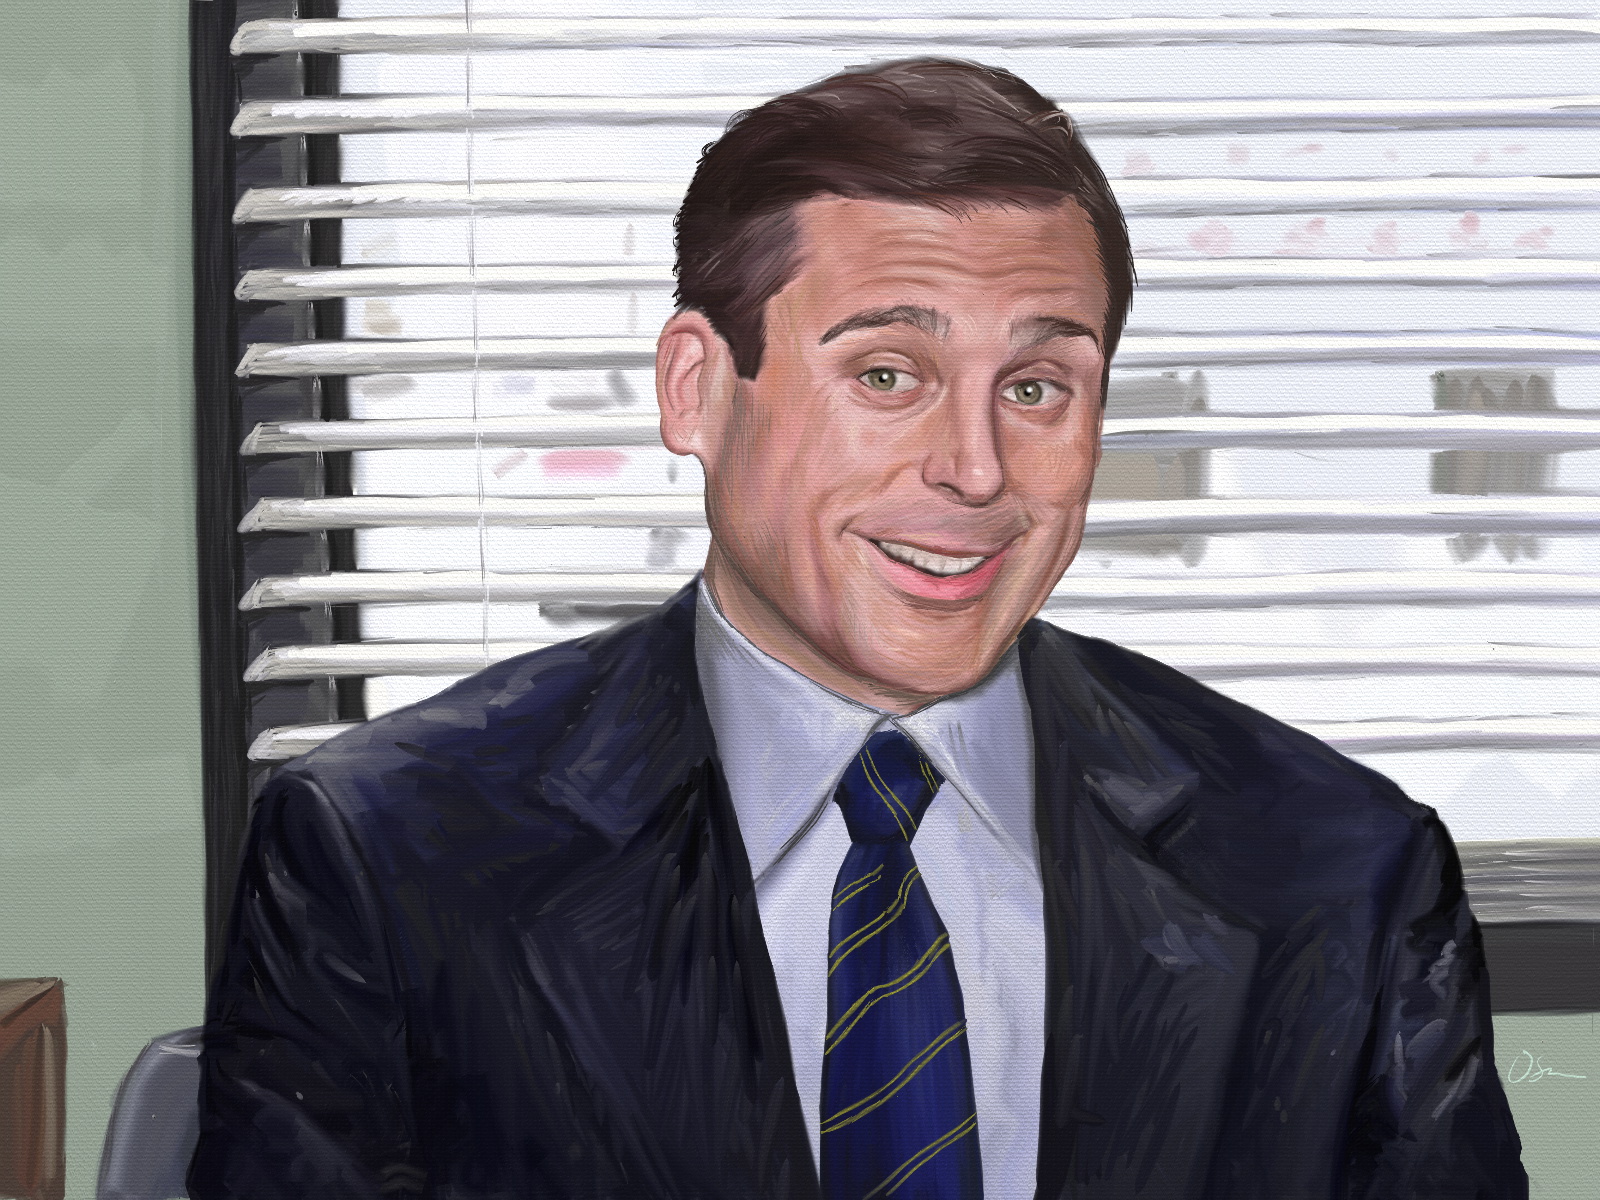 michael scott wallpaper,white collar worker,forehead,businessperson,official,photography